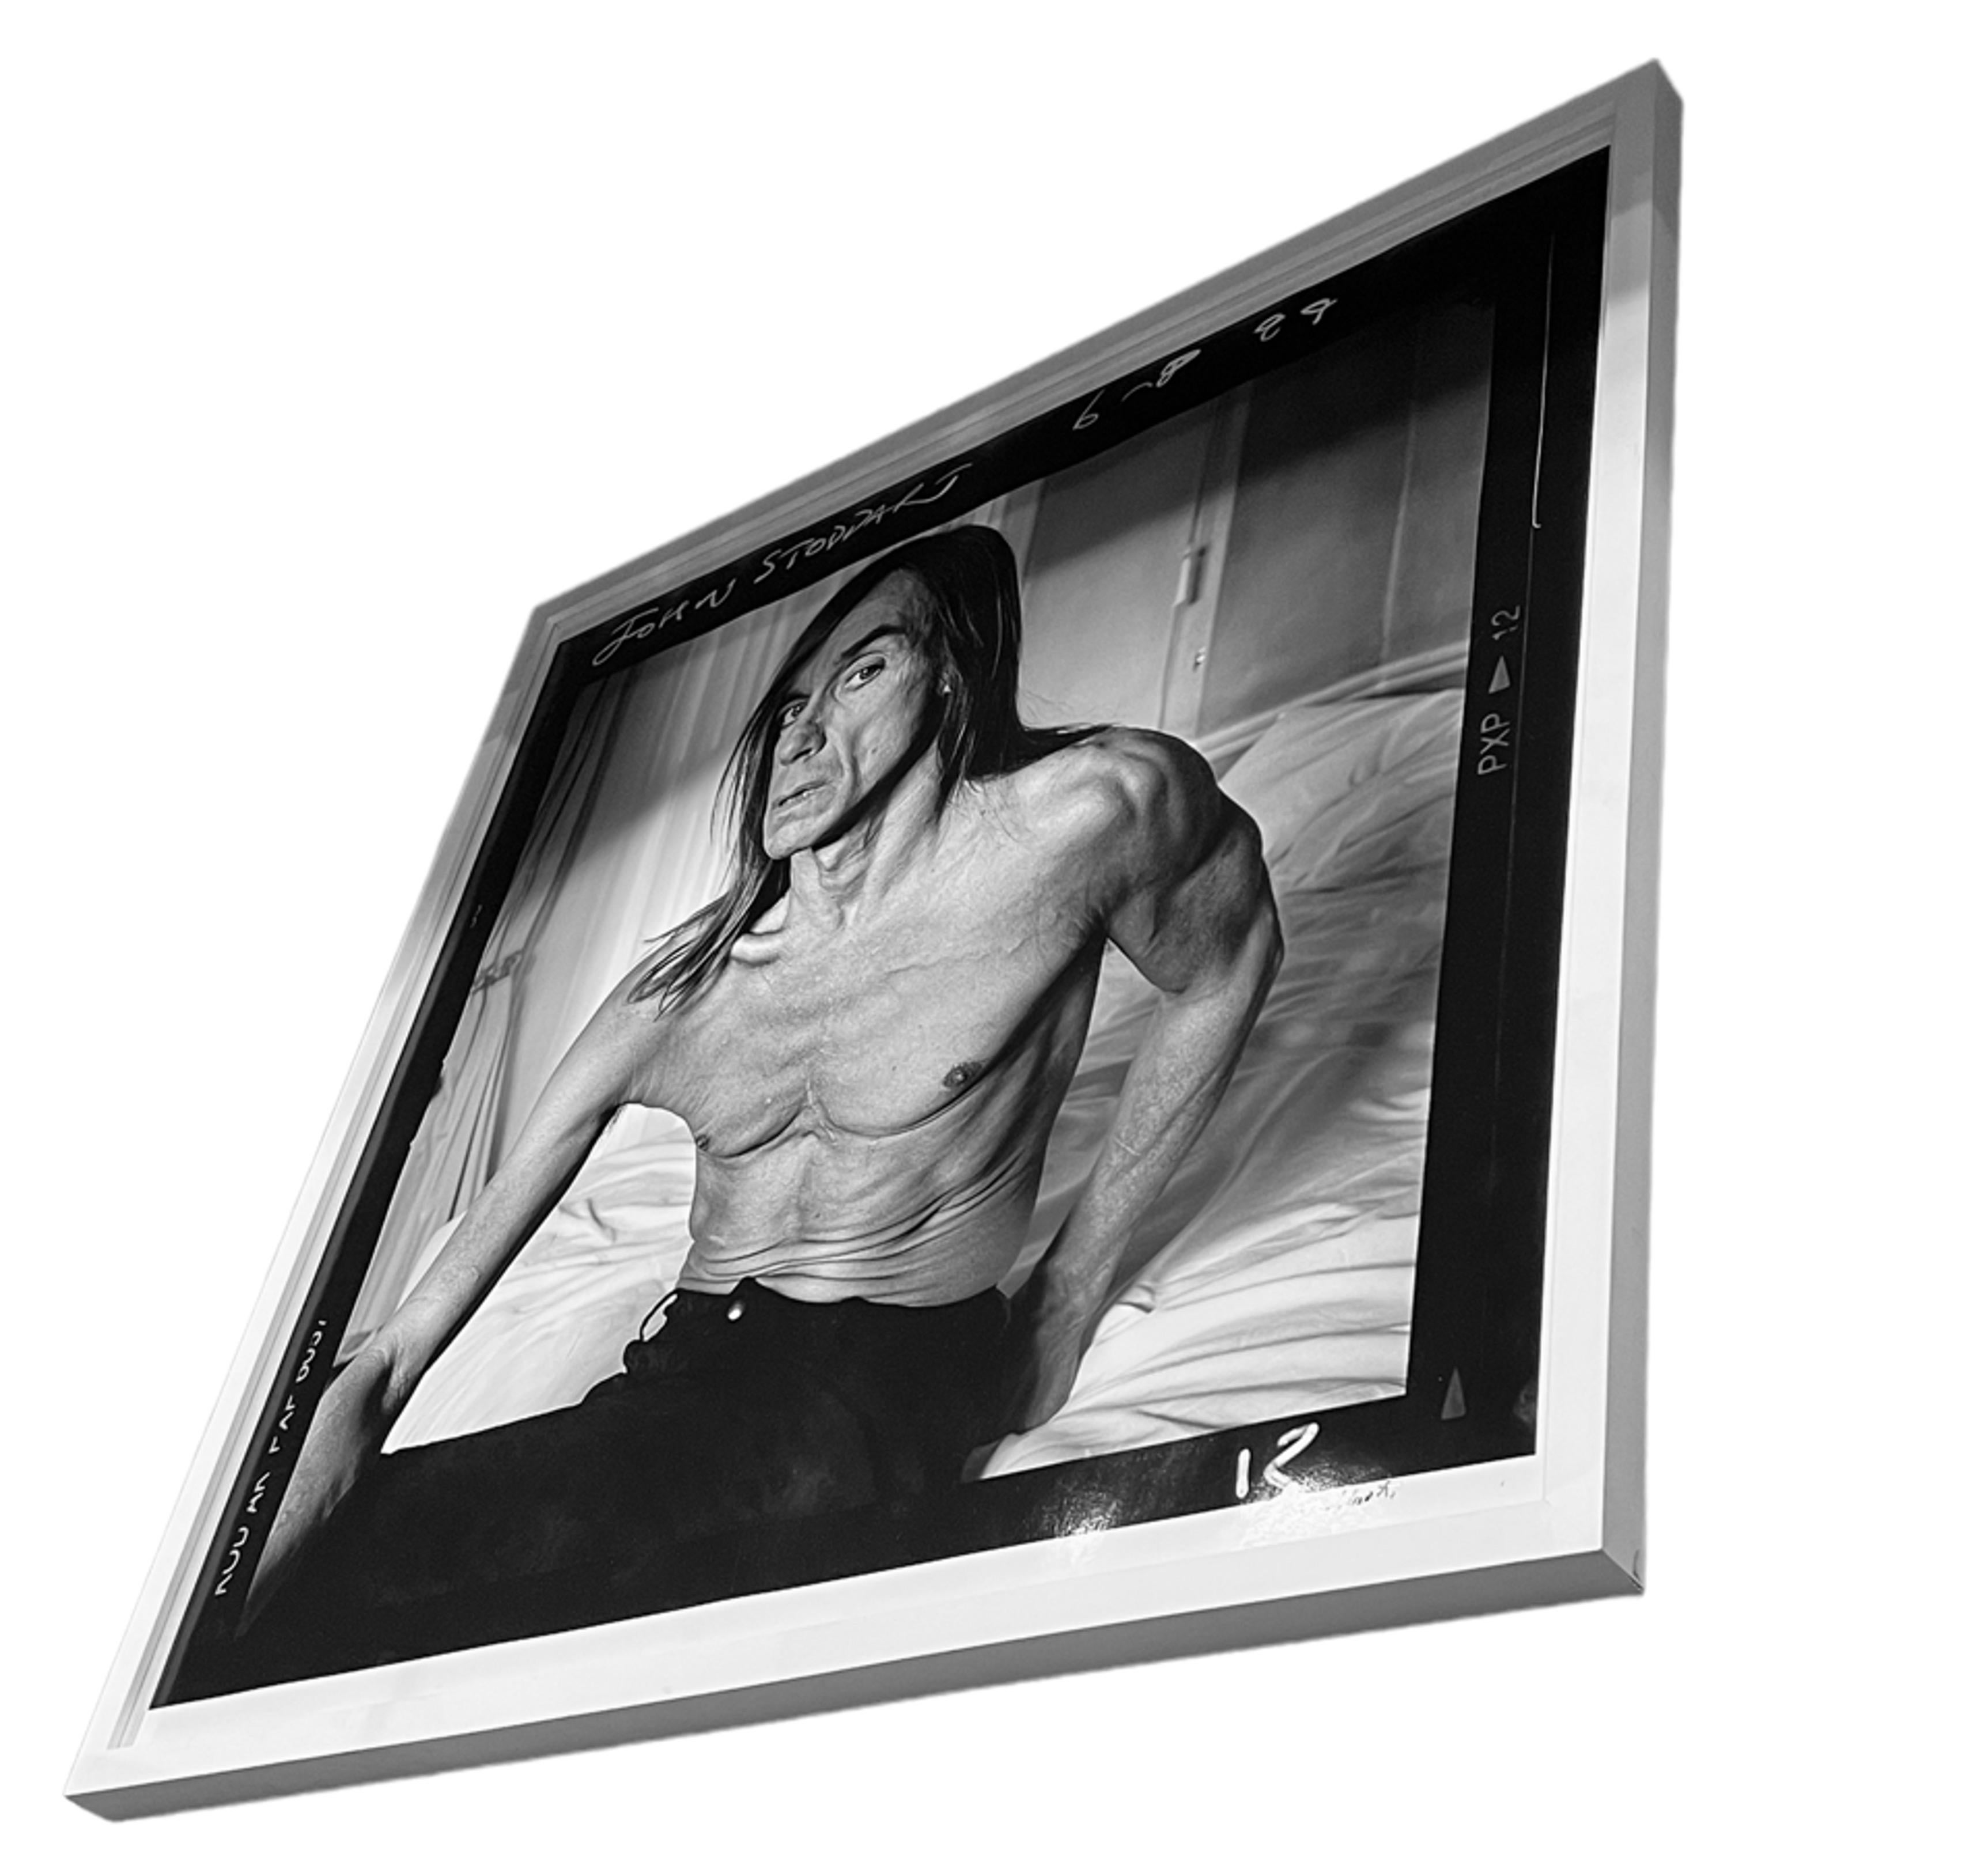 Introducing an original black and white photograph featuring the iconic Iggy Pop, captured by celebrated photographer John Stoddart in 1999. This striking image offers an intimate glimpse into the enigmatic persona of the legendary musician.

The